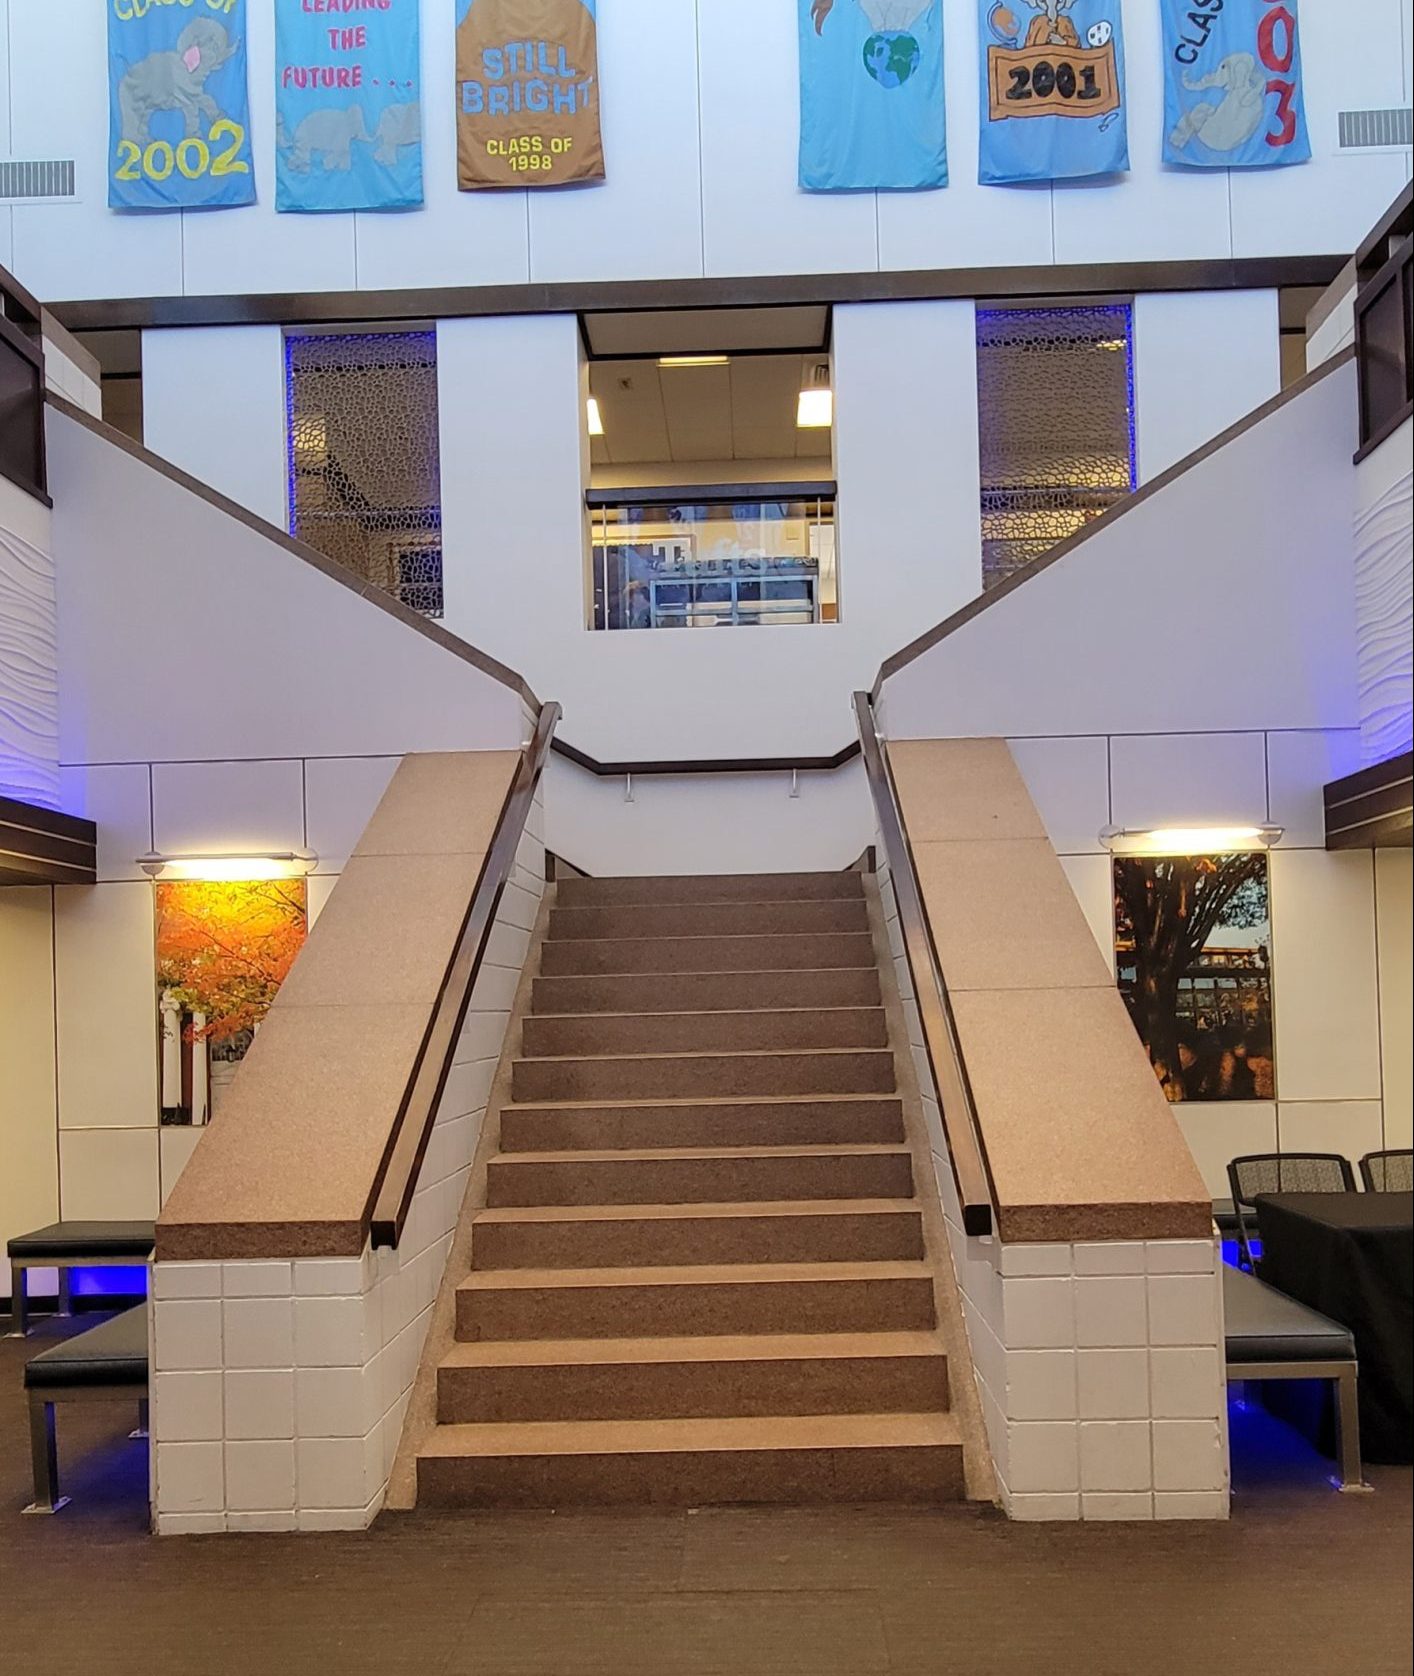 Wide stairs that split left and right at the top. Tufts banners hang on the wall above.